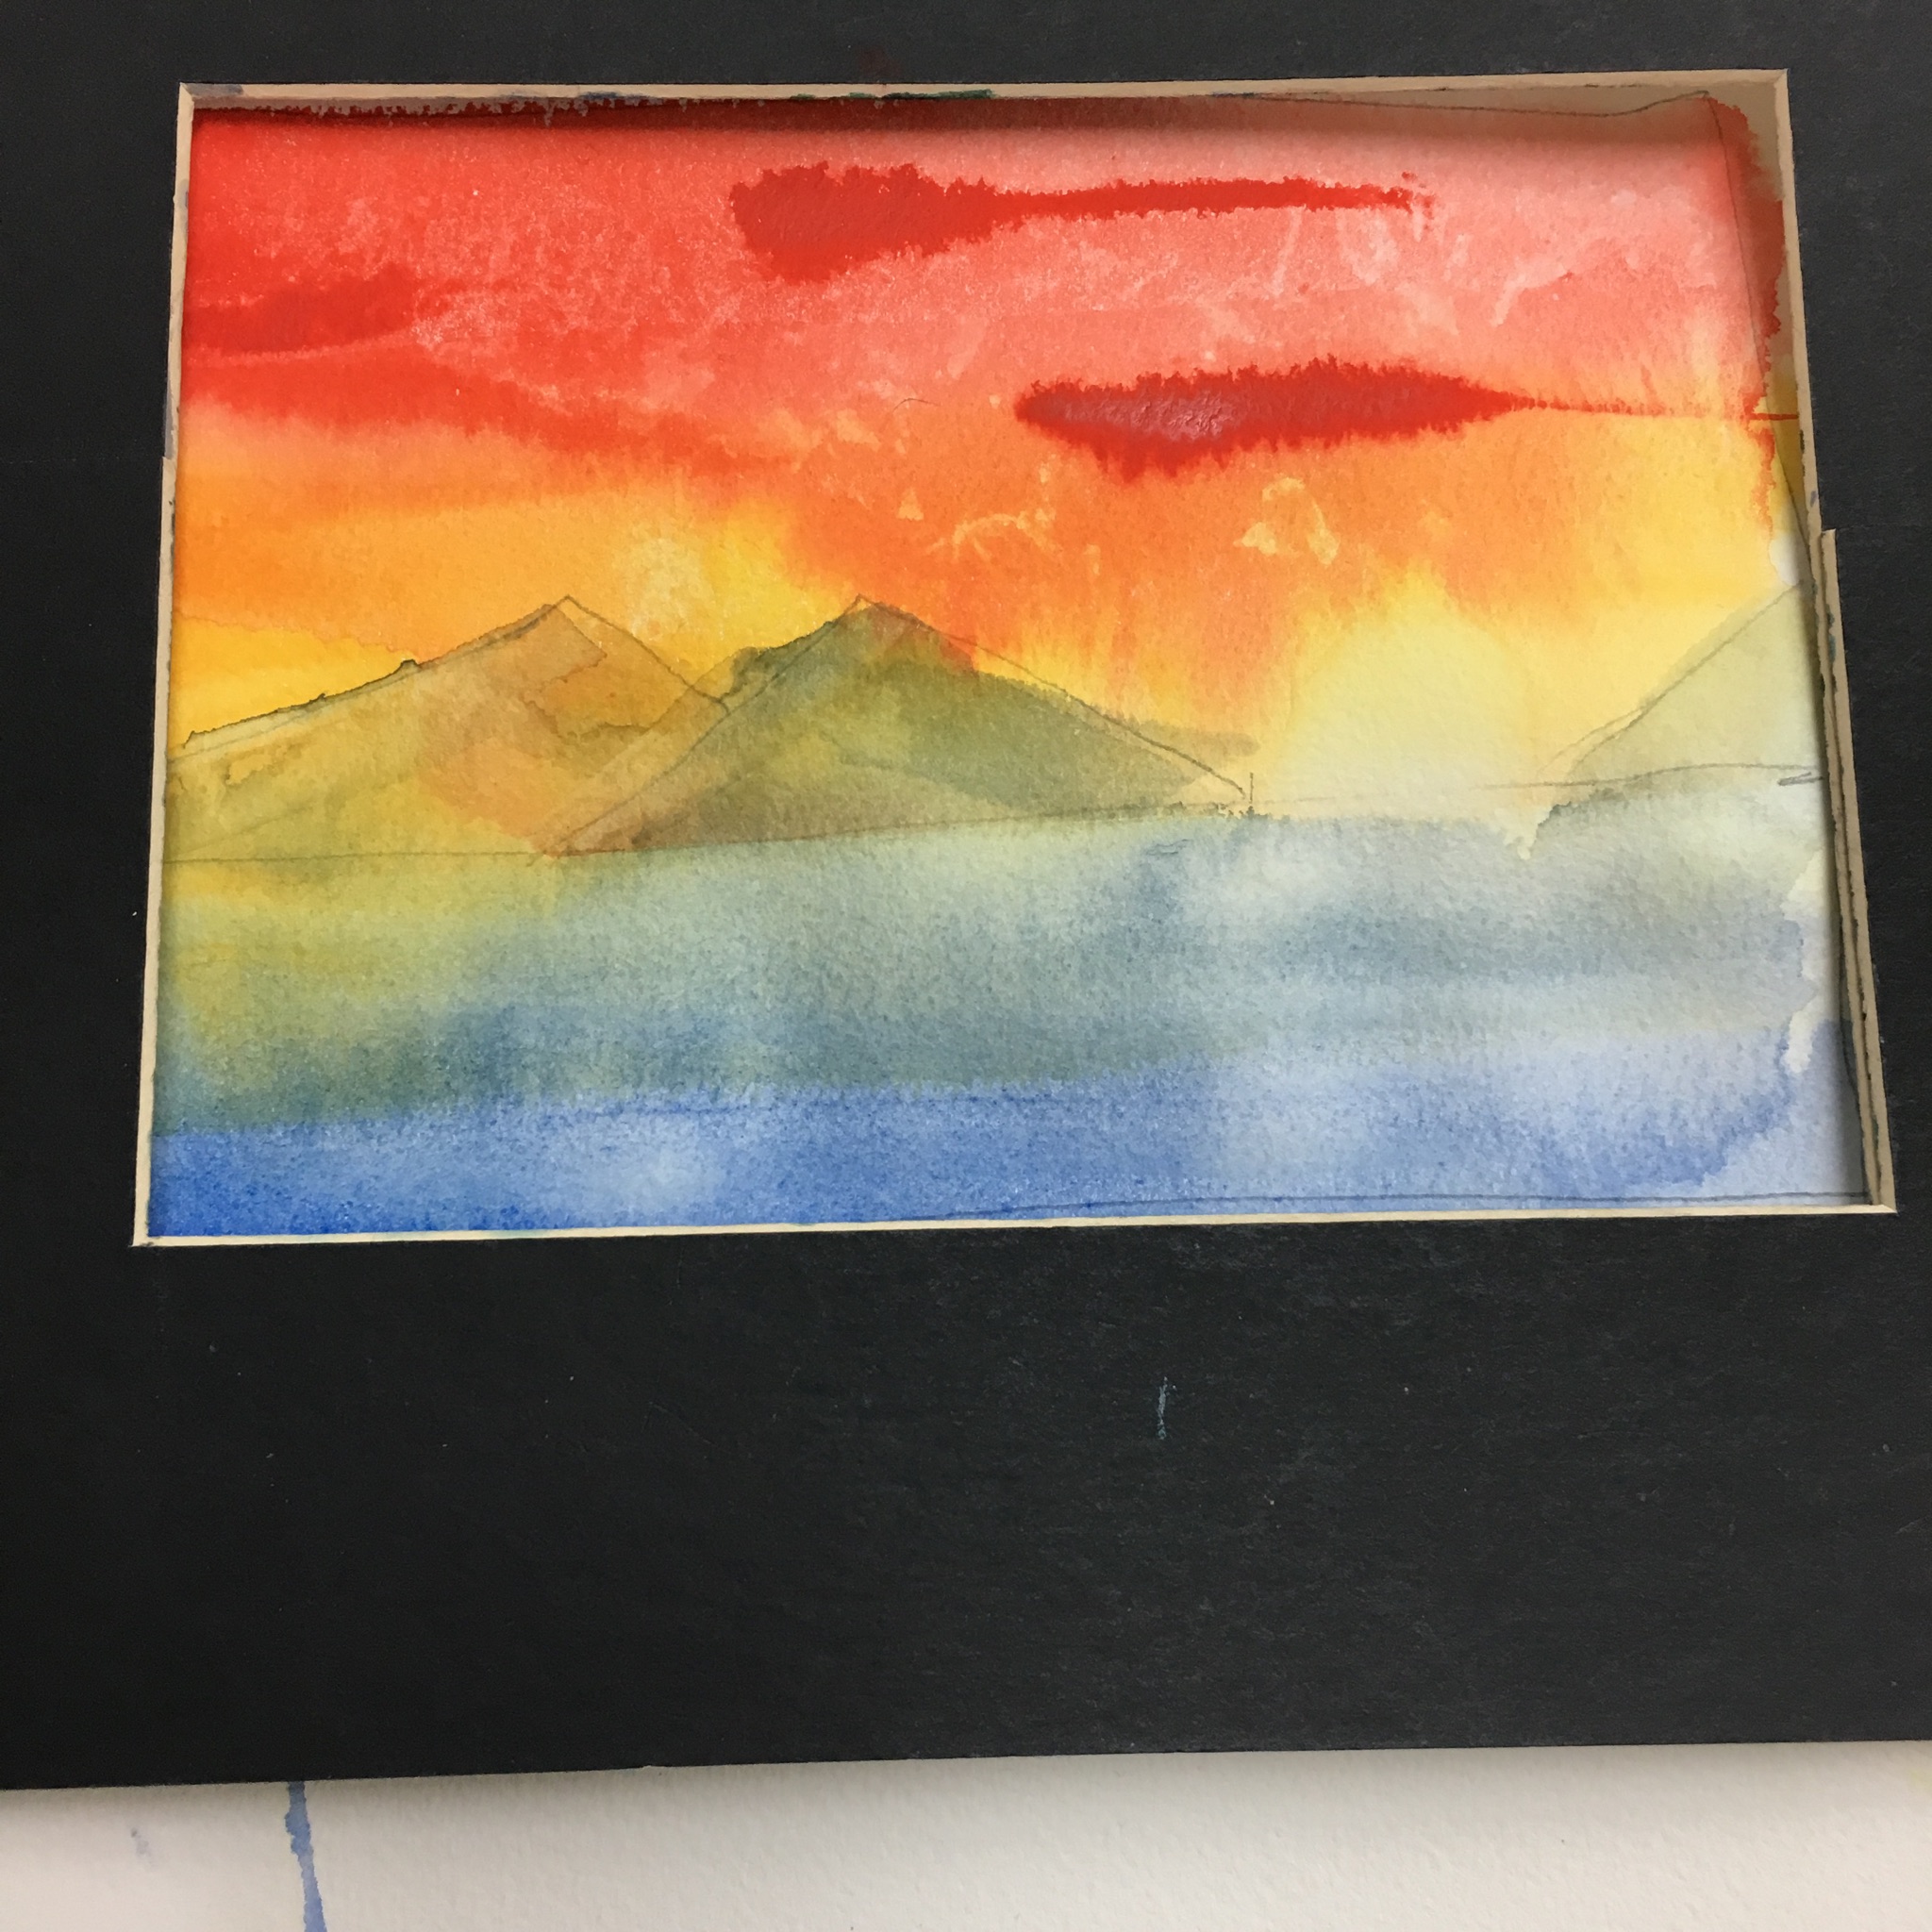 Here is one from a class exercise -- a sunrise (or sunset, could be either)